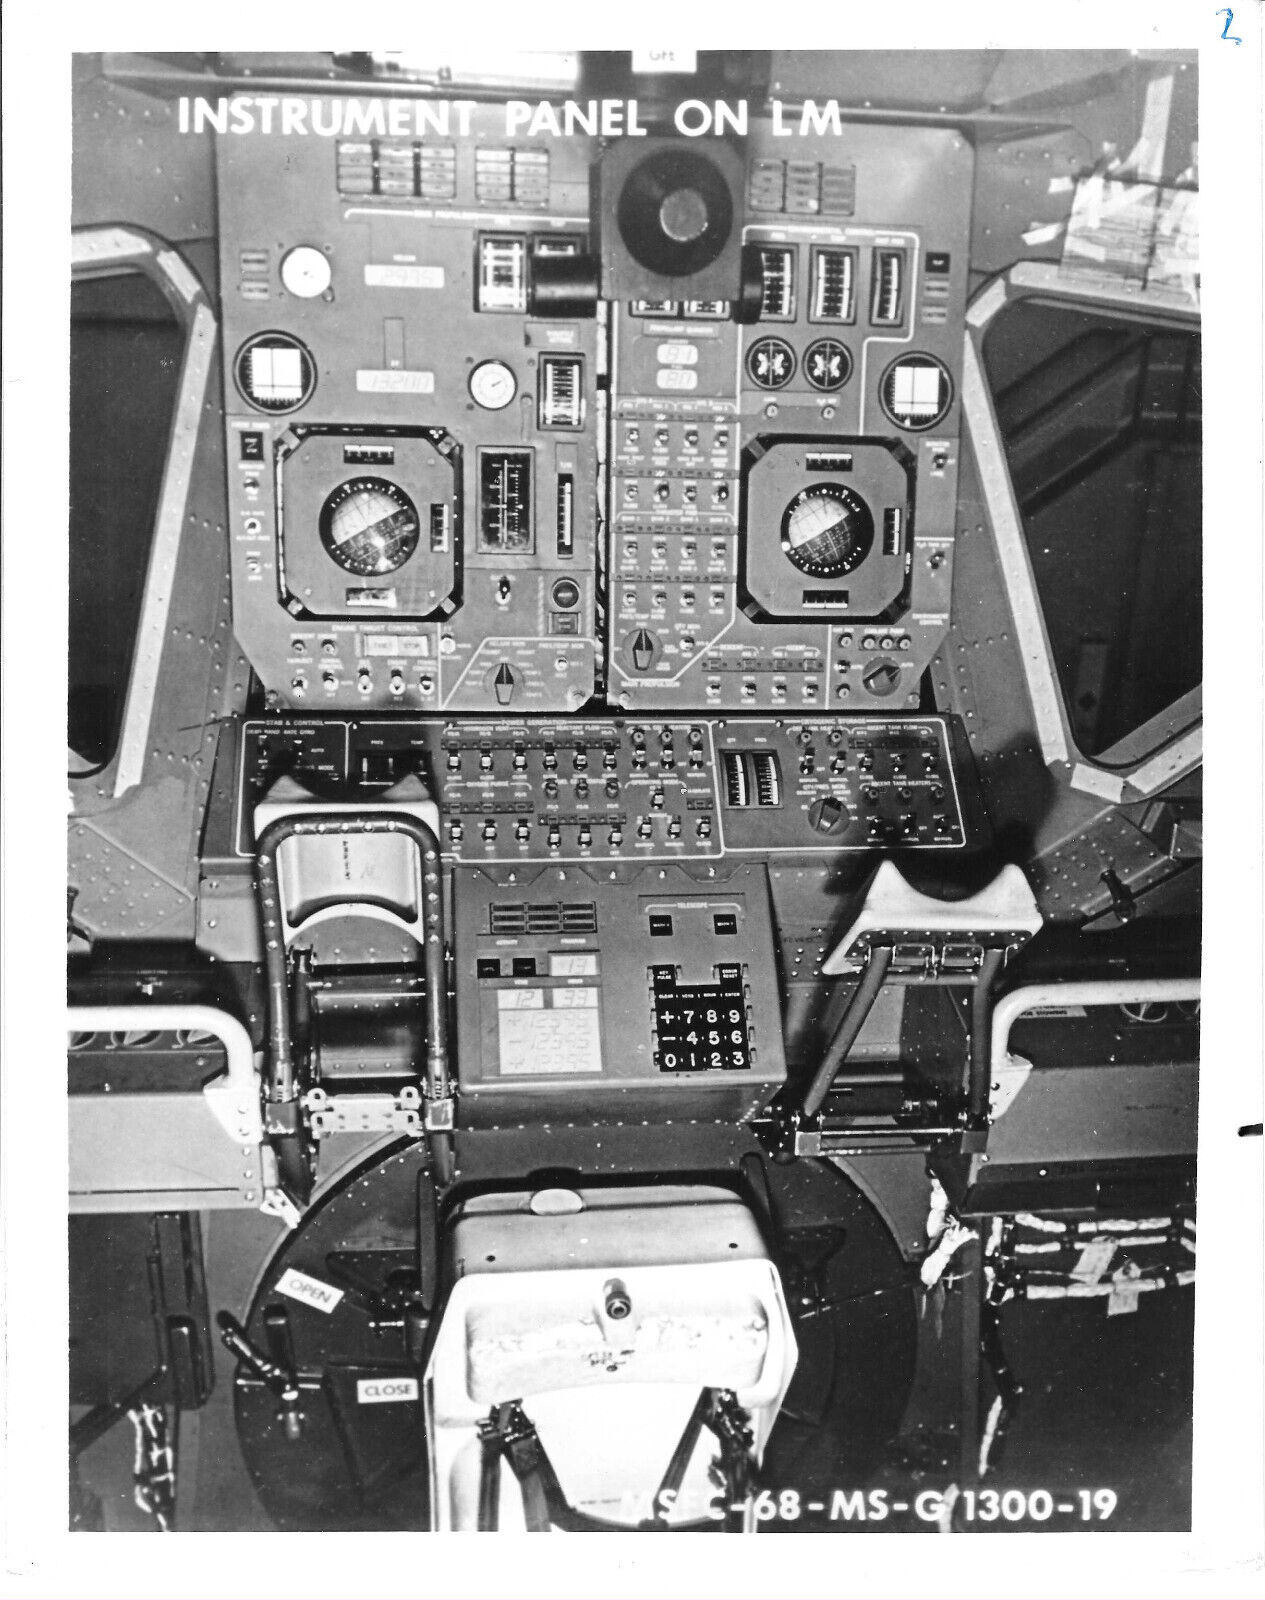 B&W NASA photo showing the instrument panel on the Lunar Module, 1968